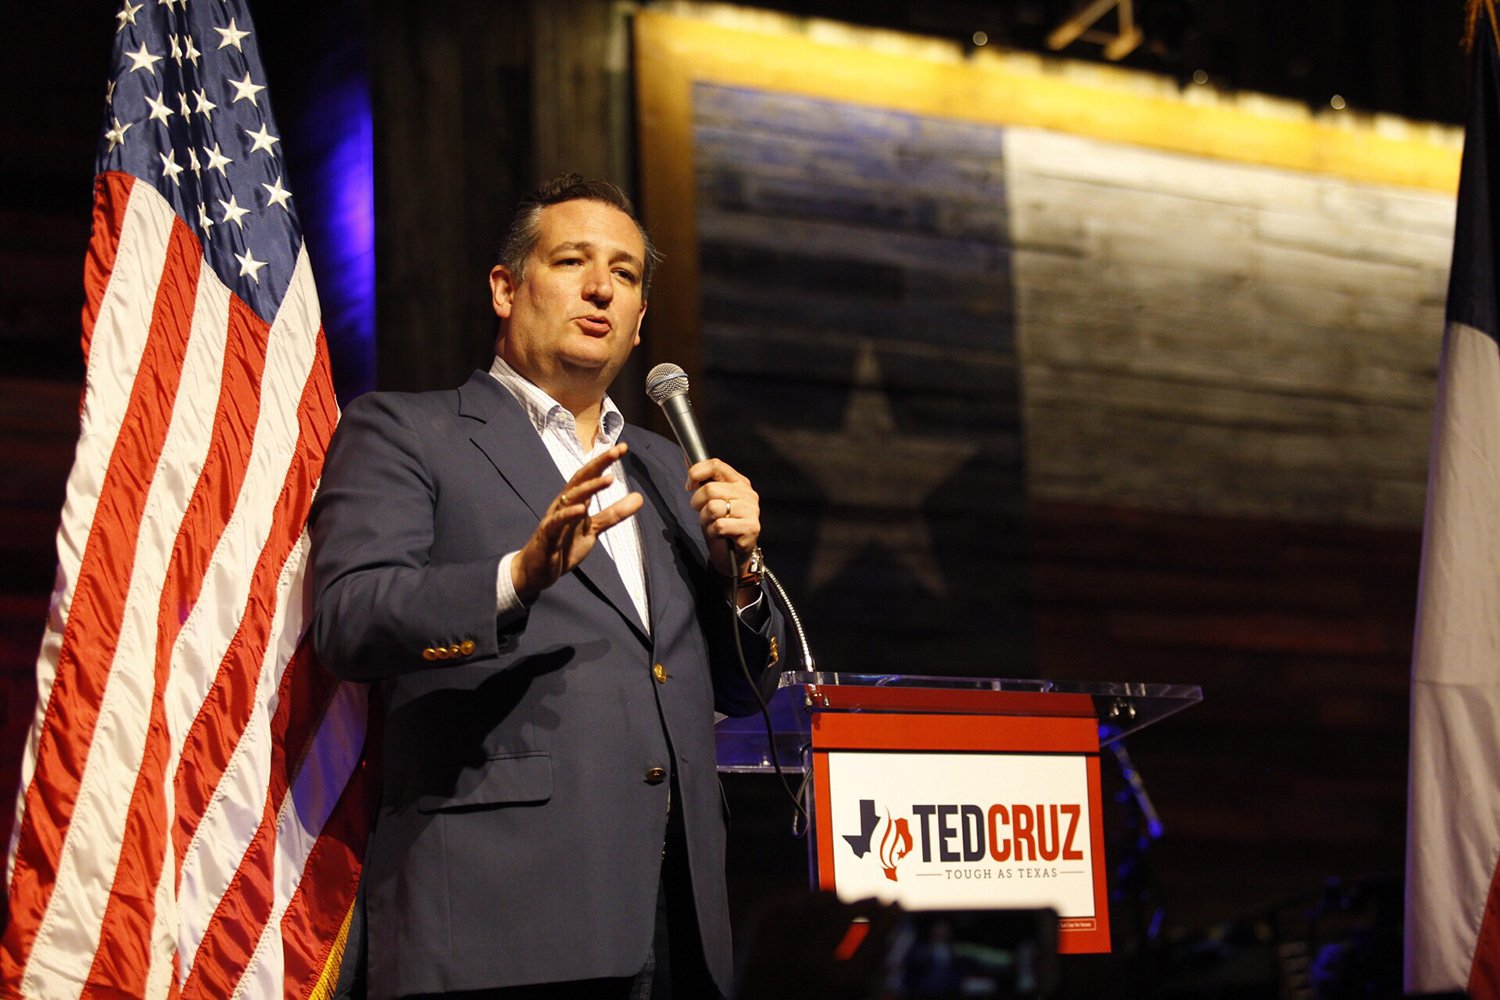 U.S. Sen. Ted Cruz speaks at the kickoff of his 2018 re-election campaign in Stafford on April 2, 2018.